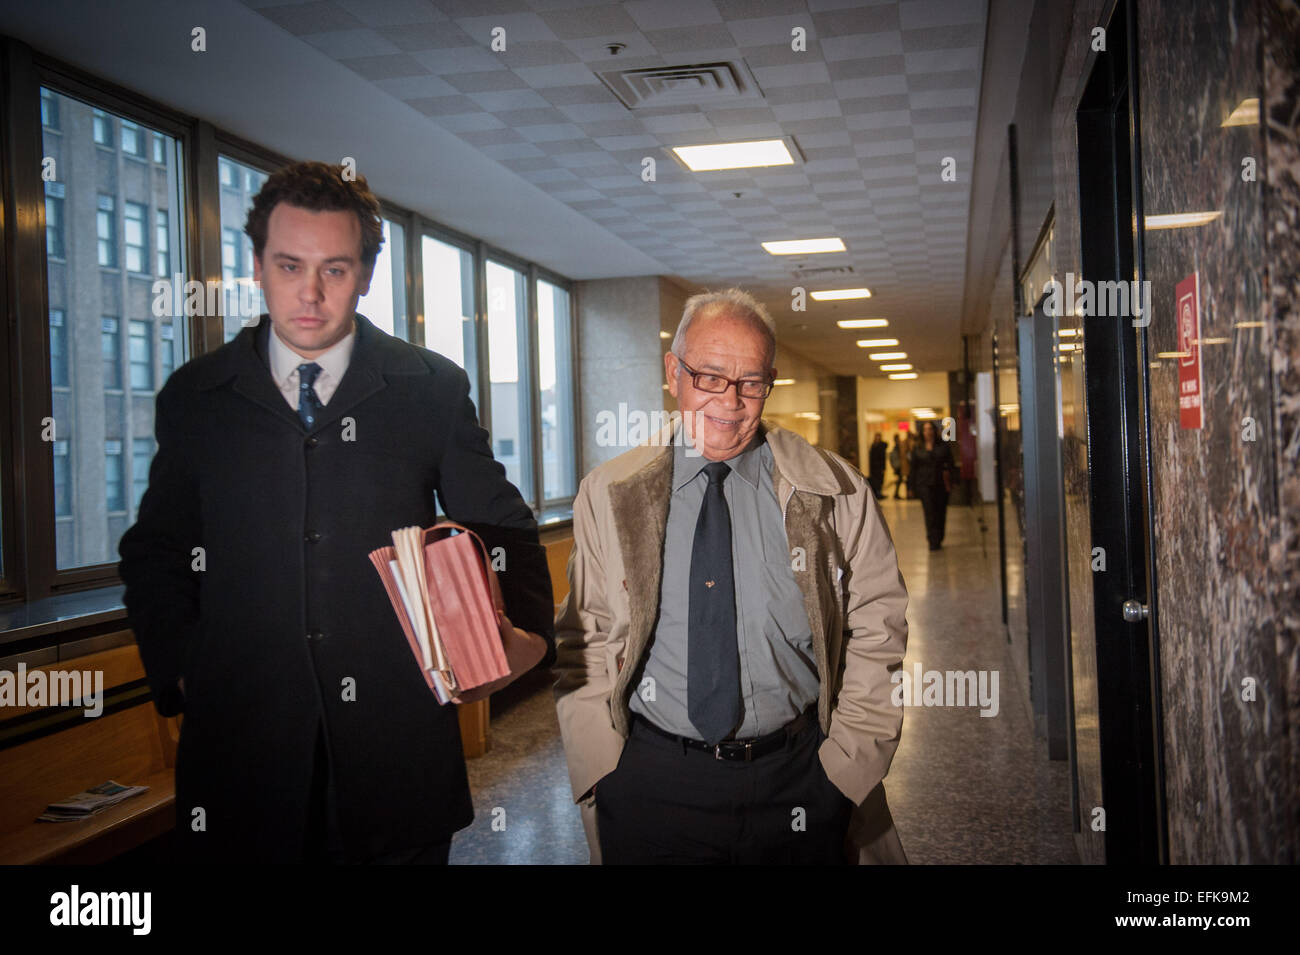 Manhattan, New York, USA. 5th Feb, 2015. Witness RAMON RODRIGUEZ leaves the courtroom as the trial of Pedro Hernandez, charged with the abduction and murder of Etan Patz, continues, Manhattan Supreme Court, Thurs., Feb. 5, 2015. Credit:  Bryan Smith/ZUMA Wire/Alamy Live News Stock Photo